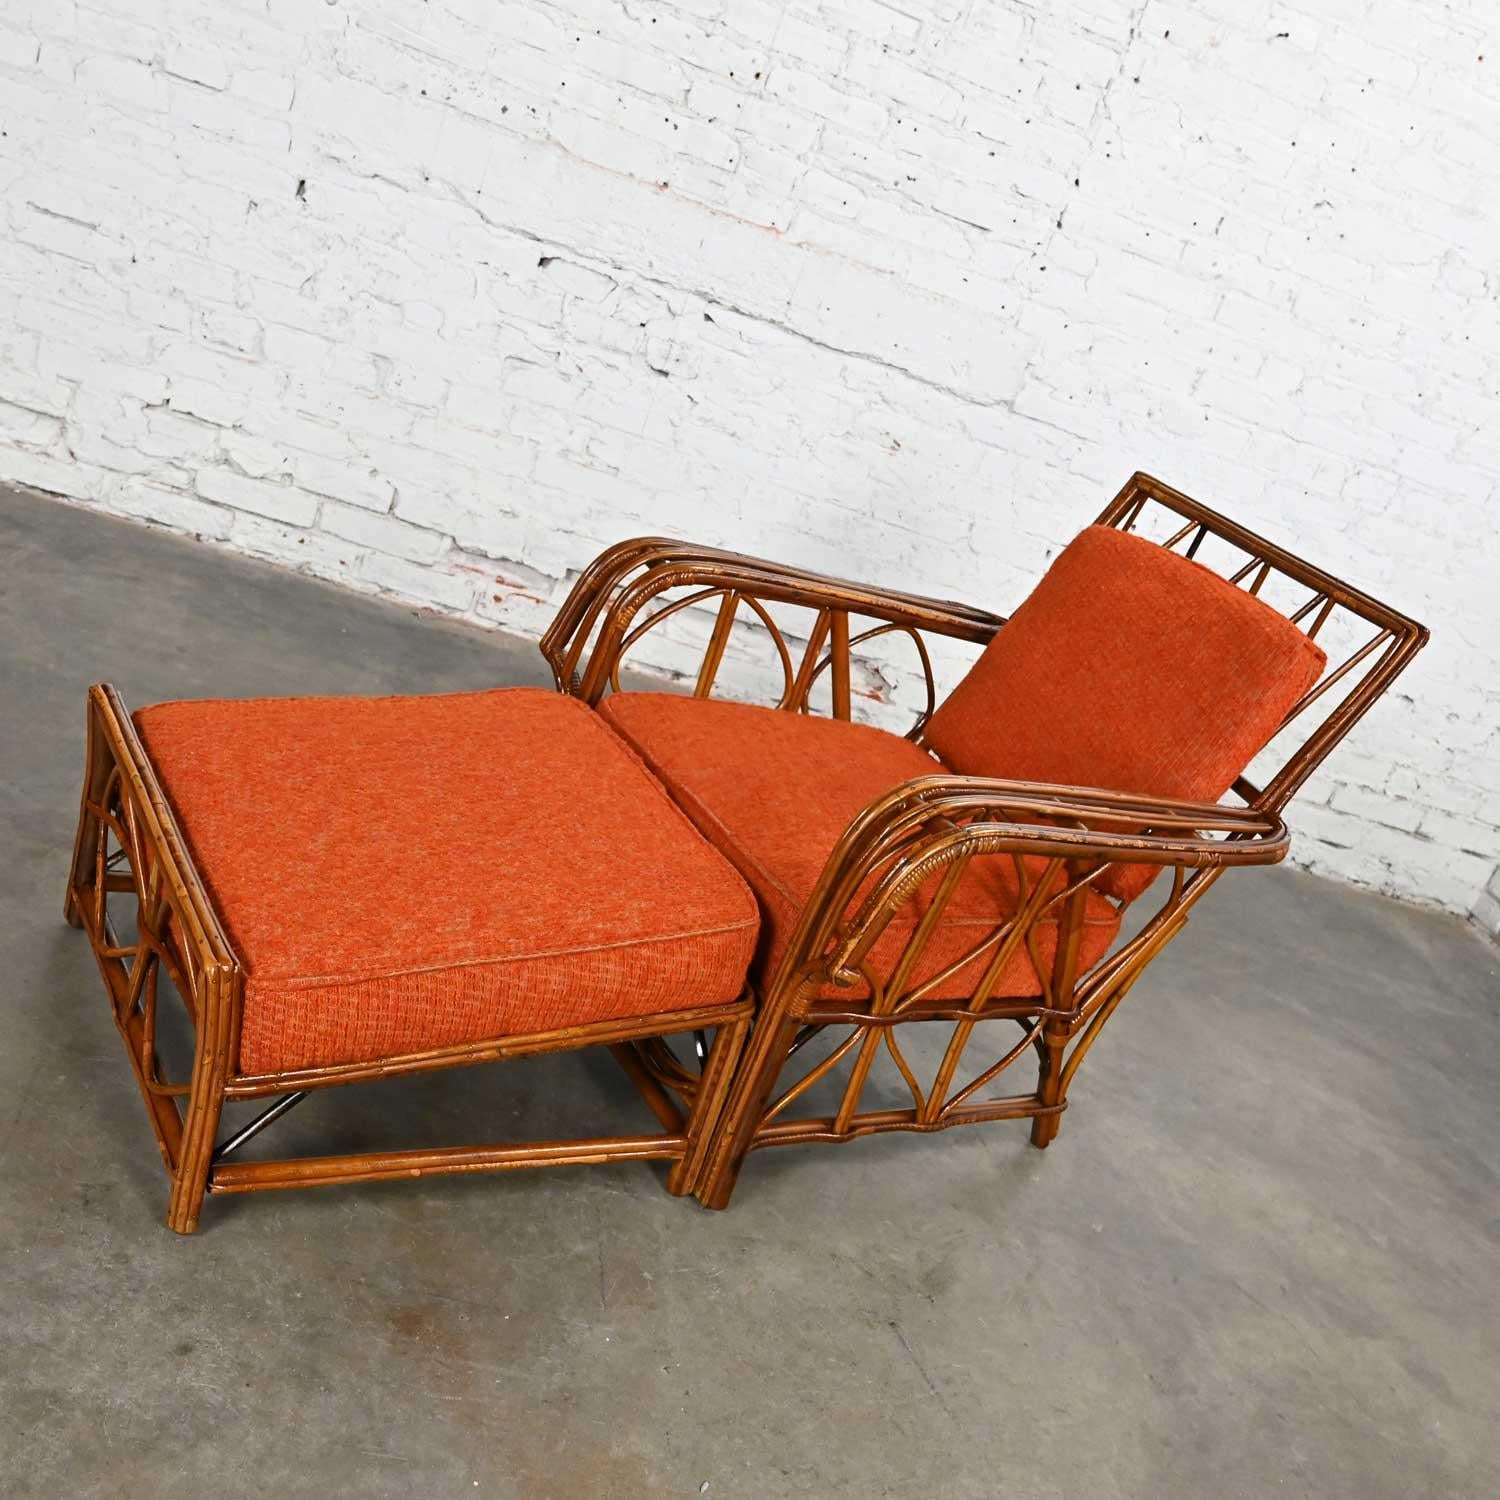 Rattan Lounge Chair & Ottoman Orange Fabric Cushions by Helmers Manufacturing Co 2